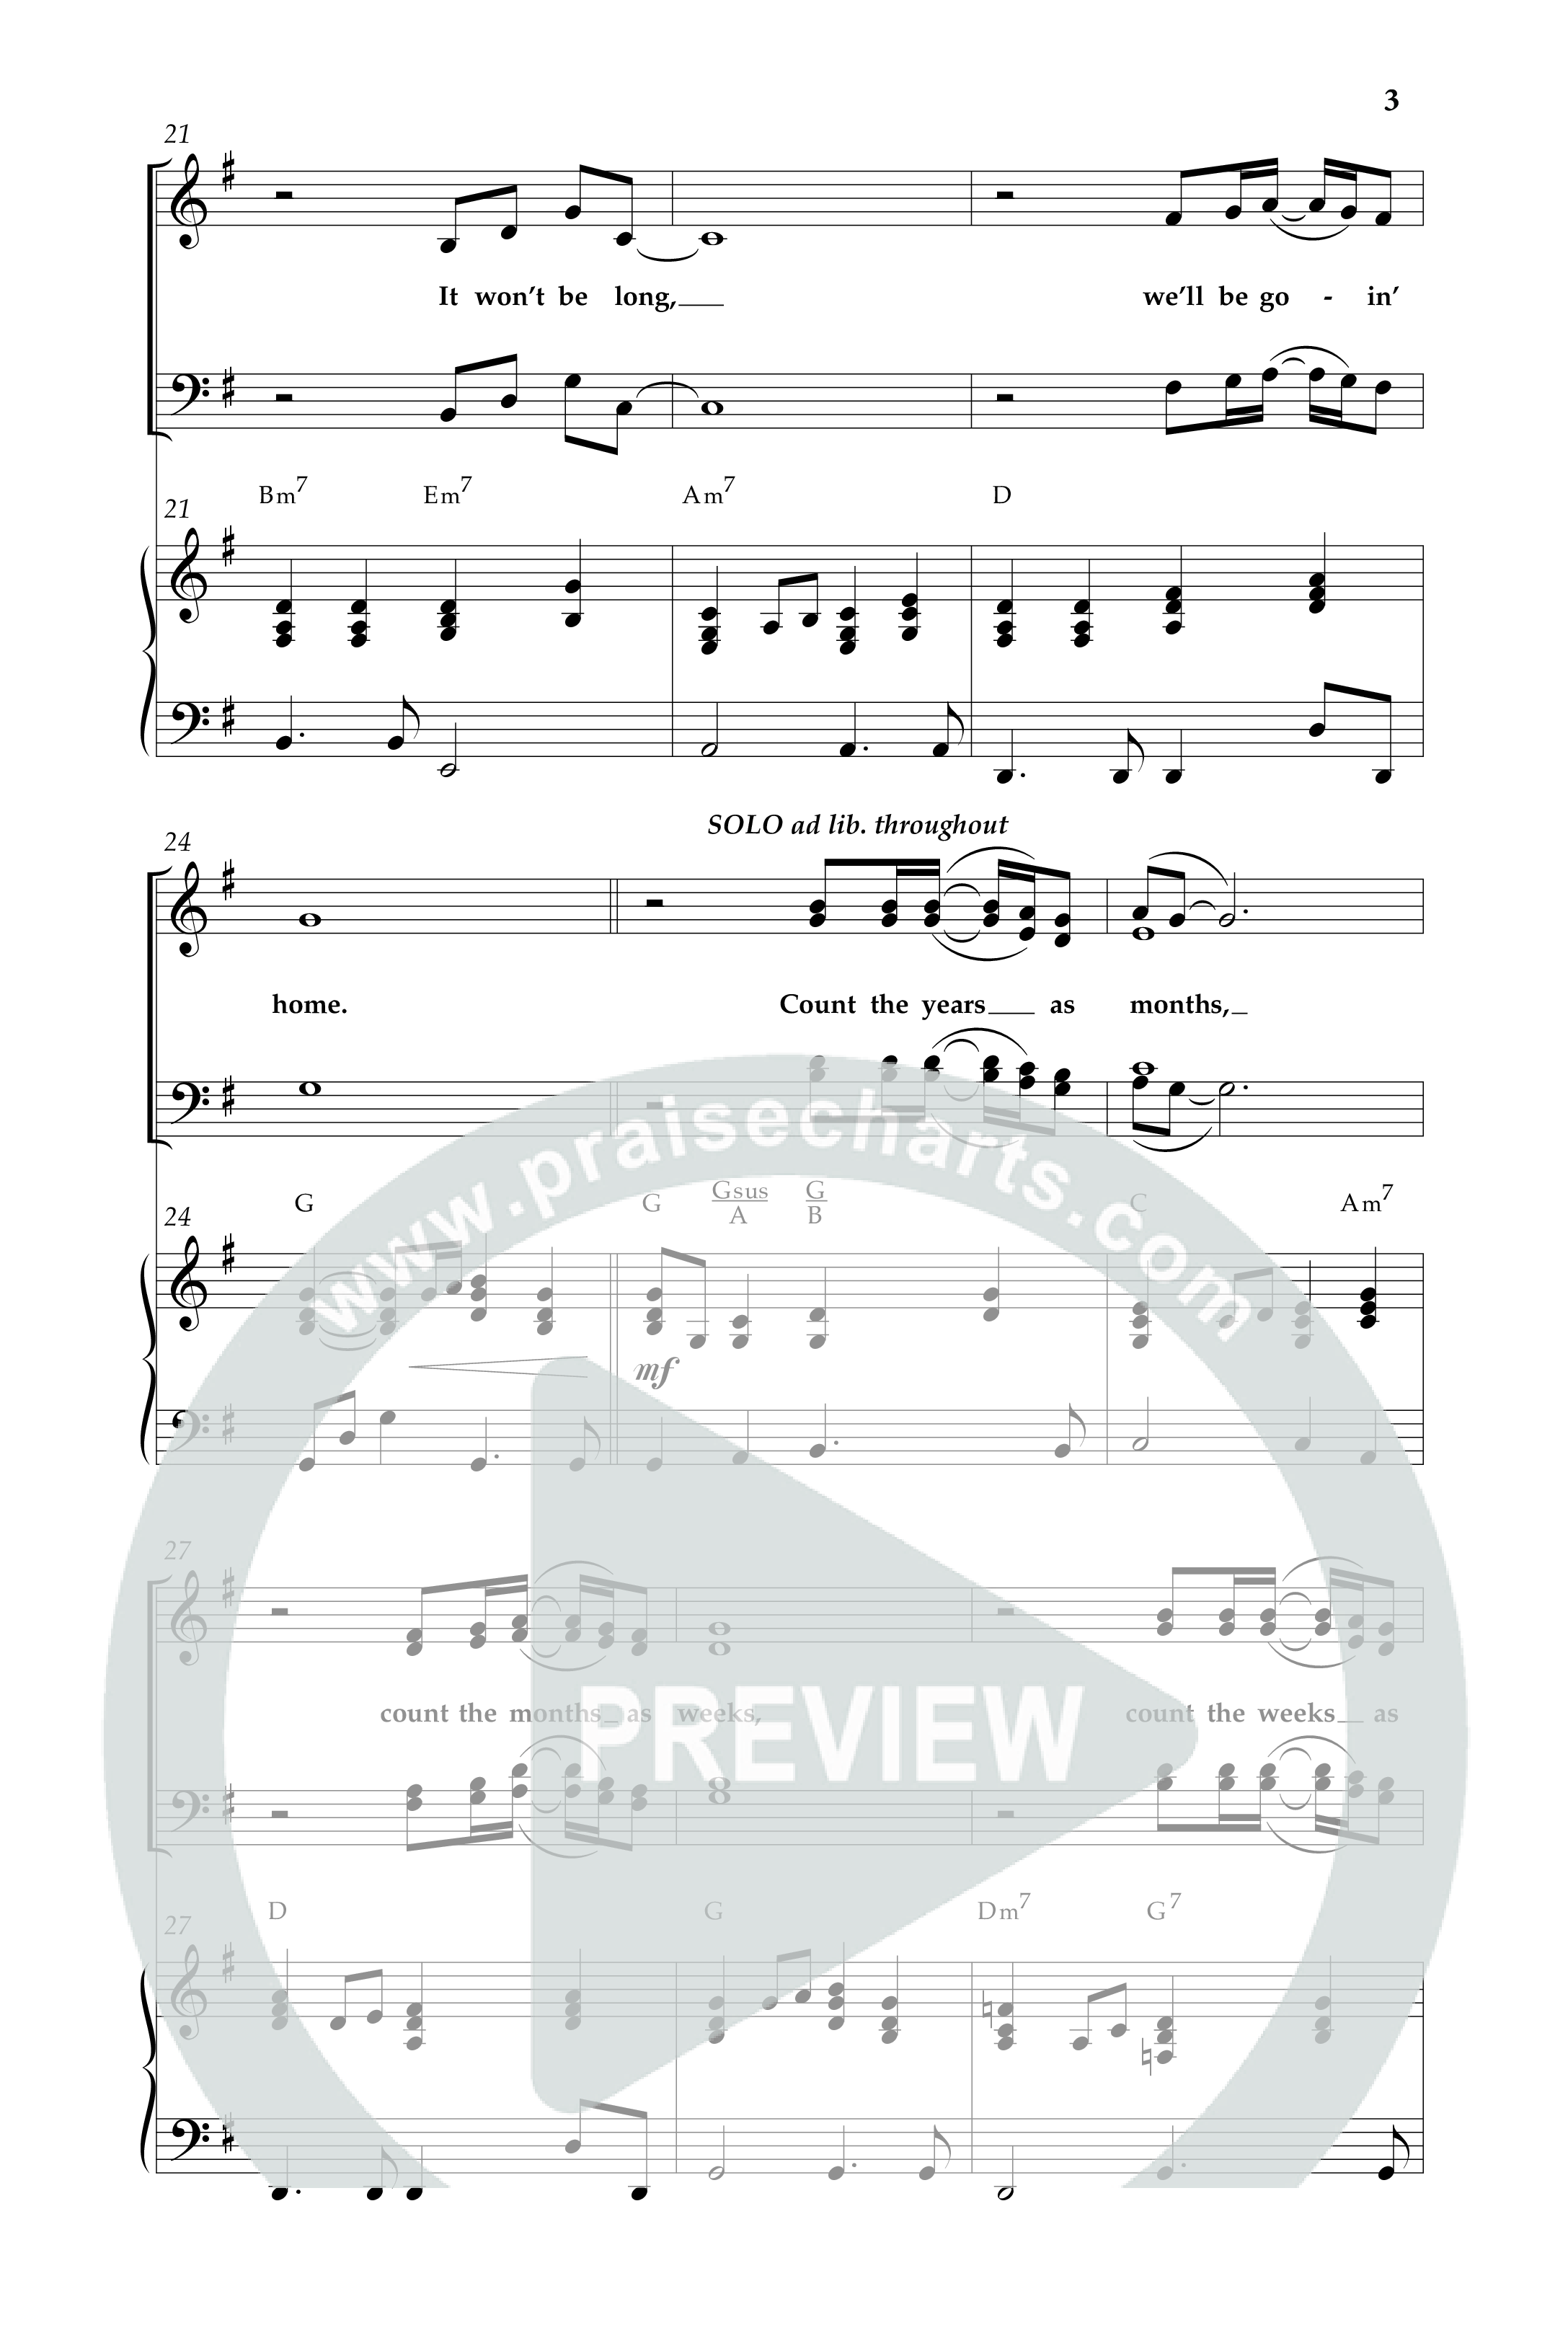 It Wont Be Long (with Soon And Very Soon) (Choral Anthem SATB) Anthem (SATB/Piano) (Lifeway Choral / Arr. Dave Williamson)